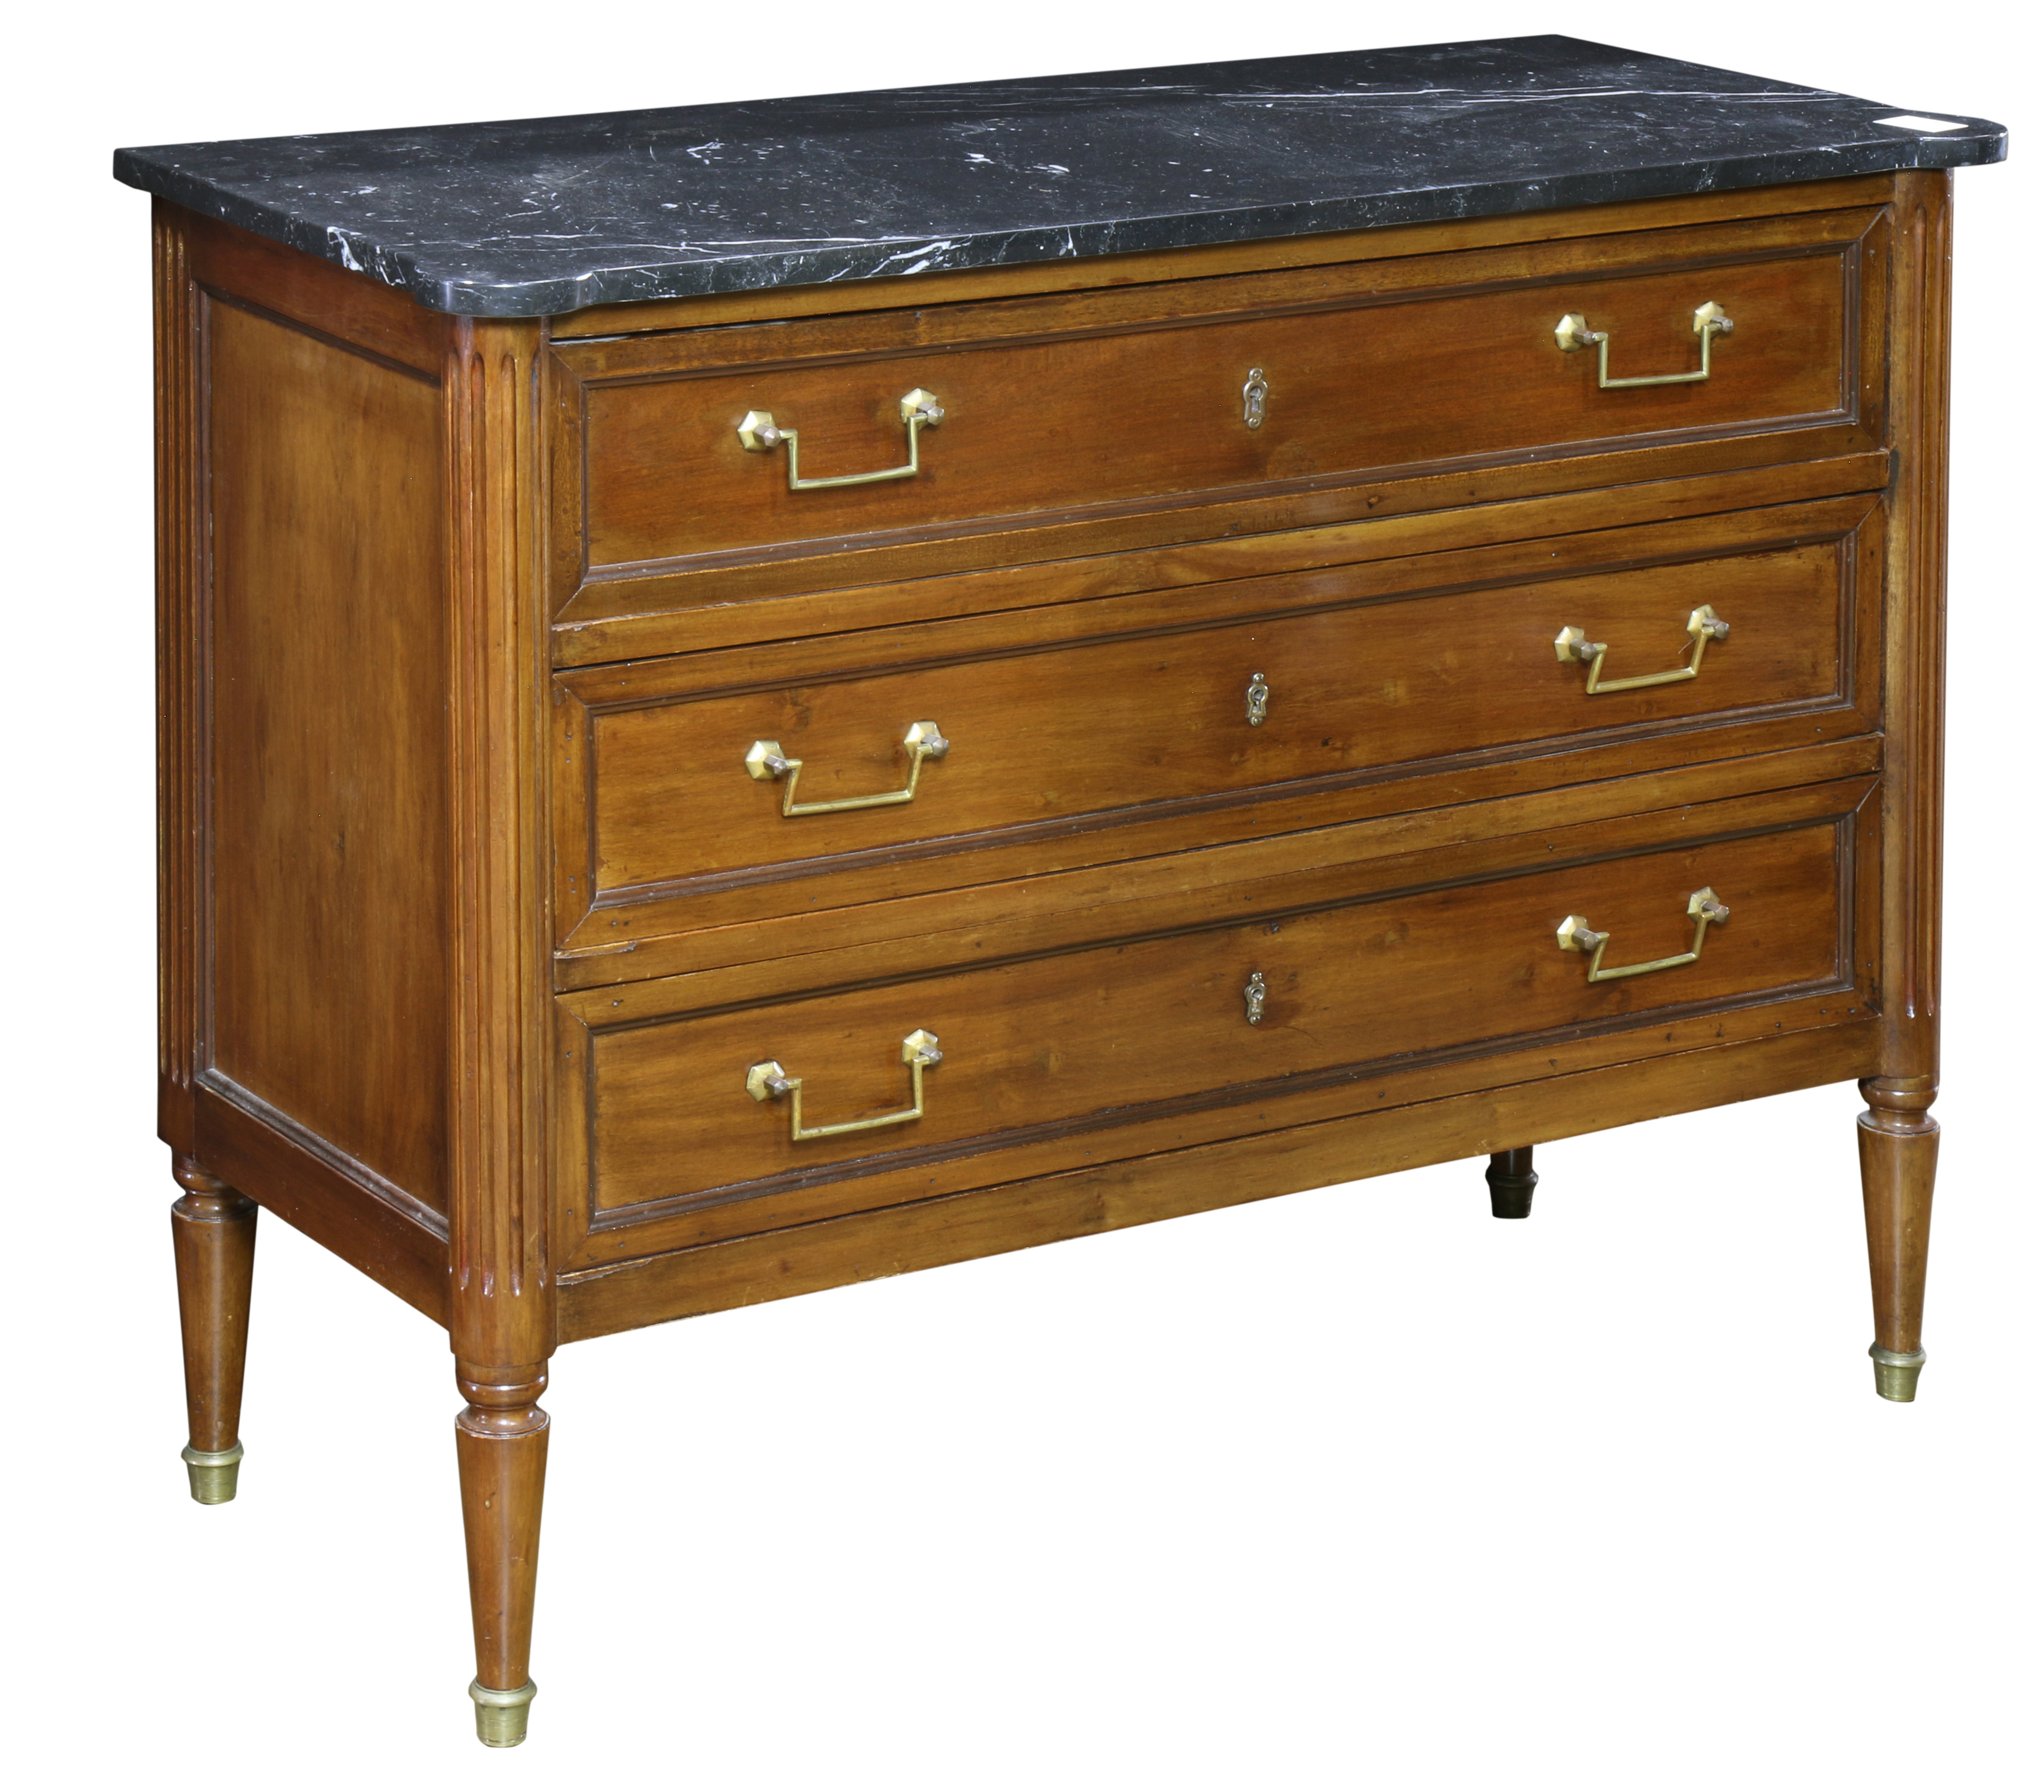 NEOCLASSICAL STYLE MARBLE TOP CHEST